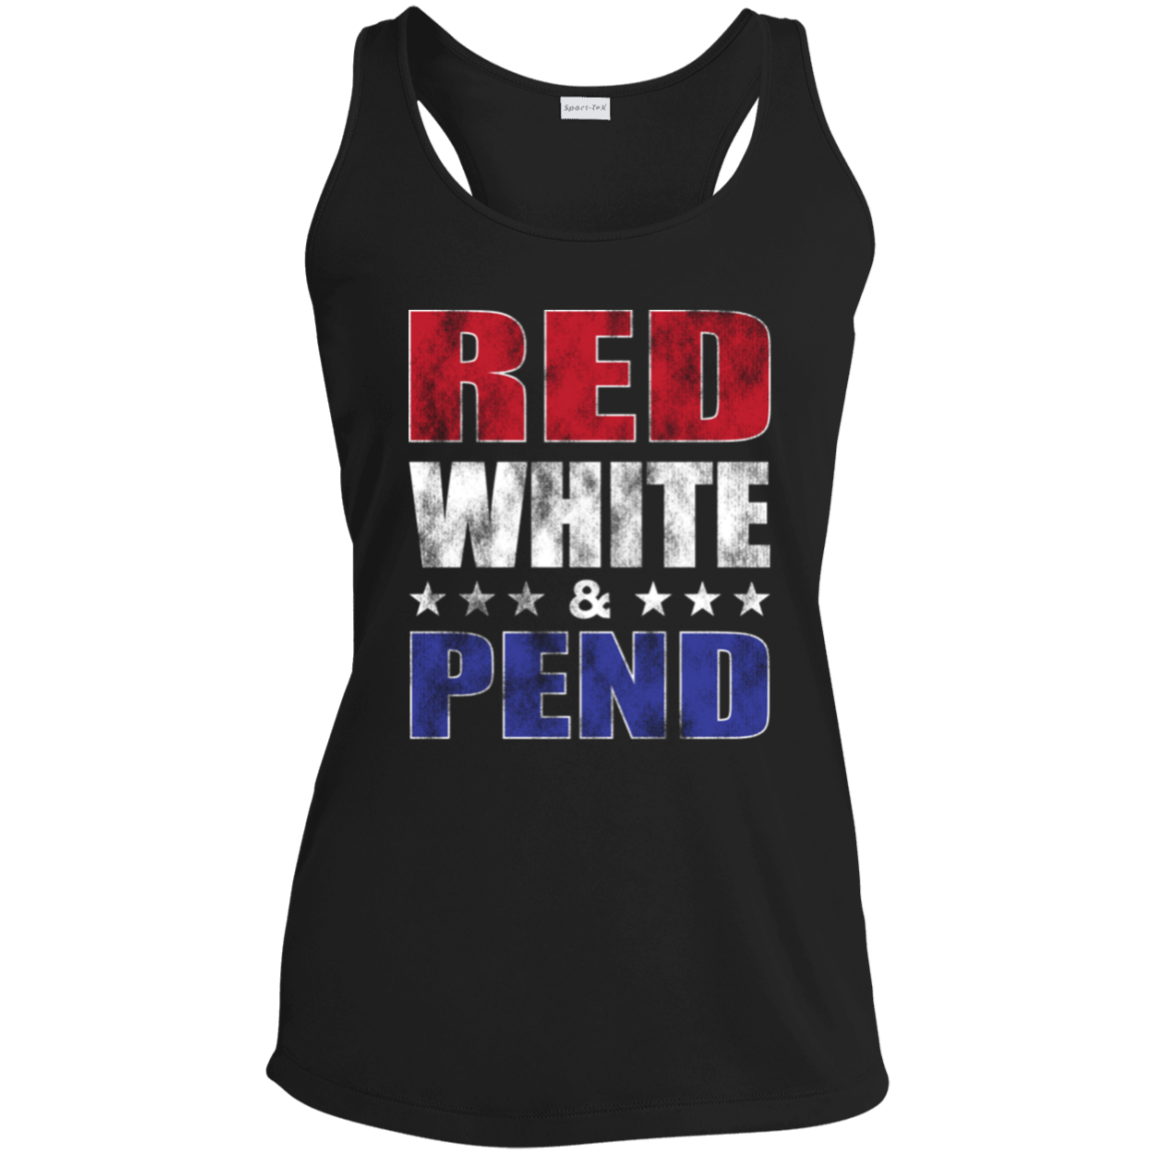 Red White & Pend Womens Racerback